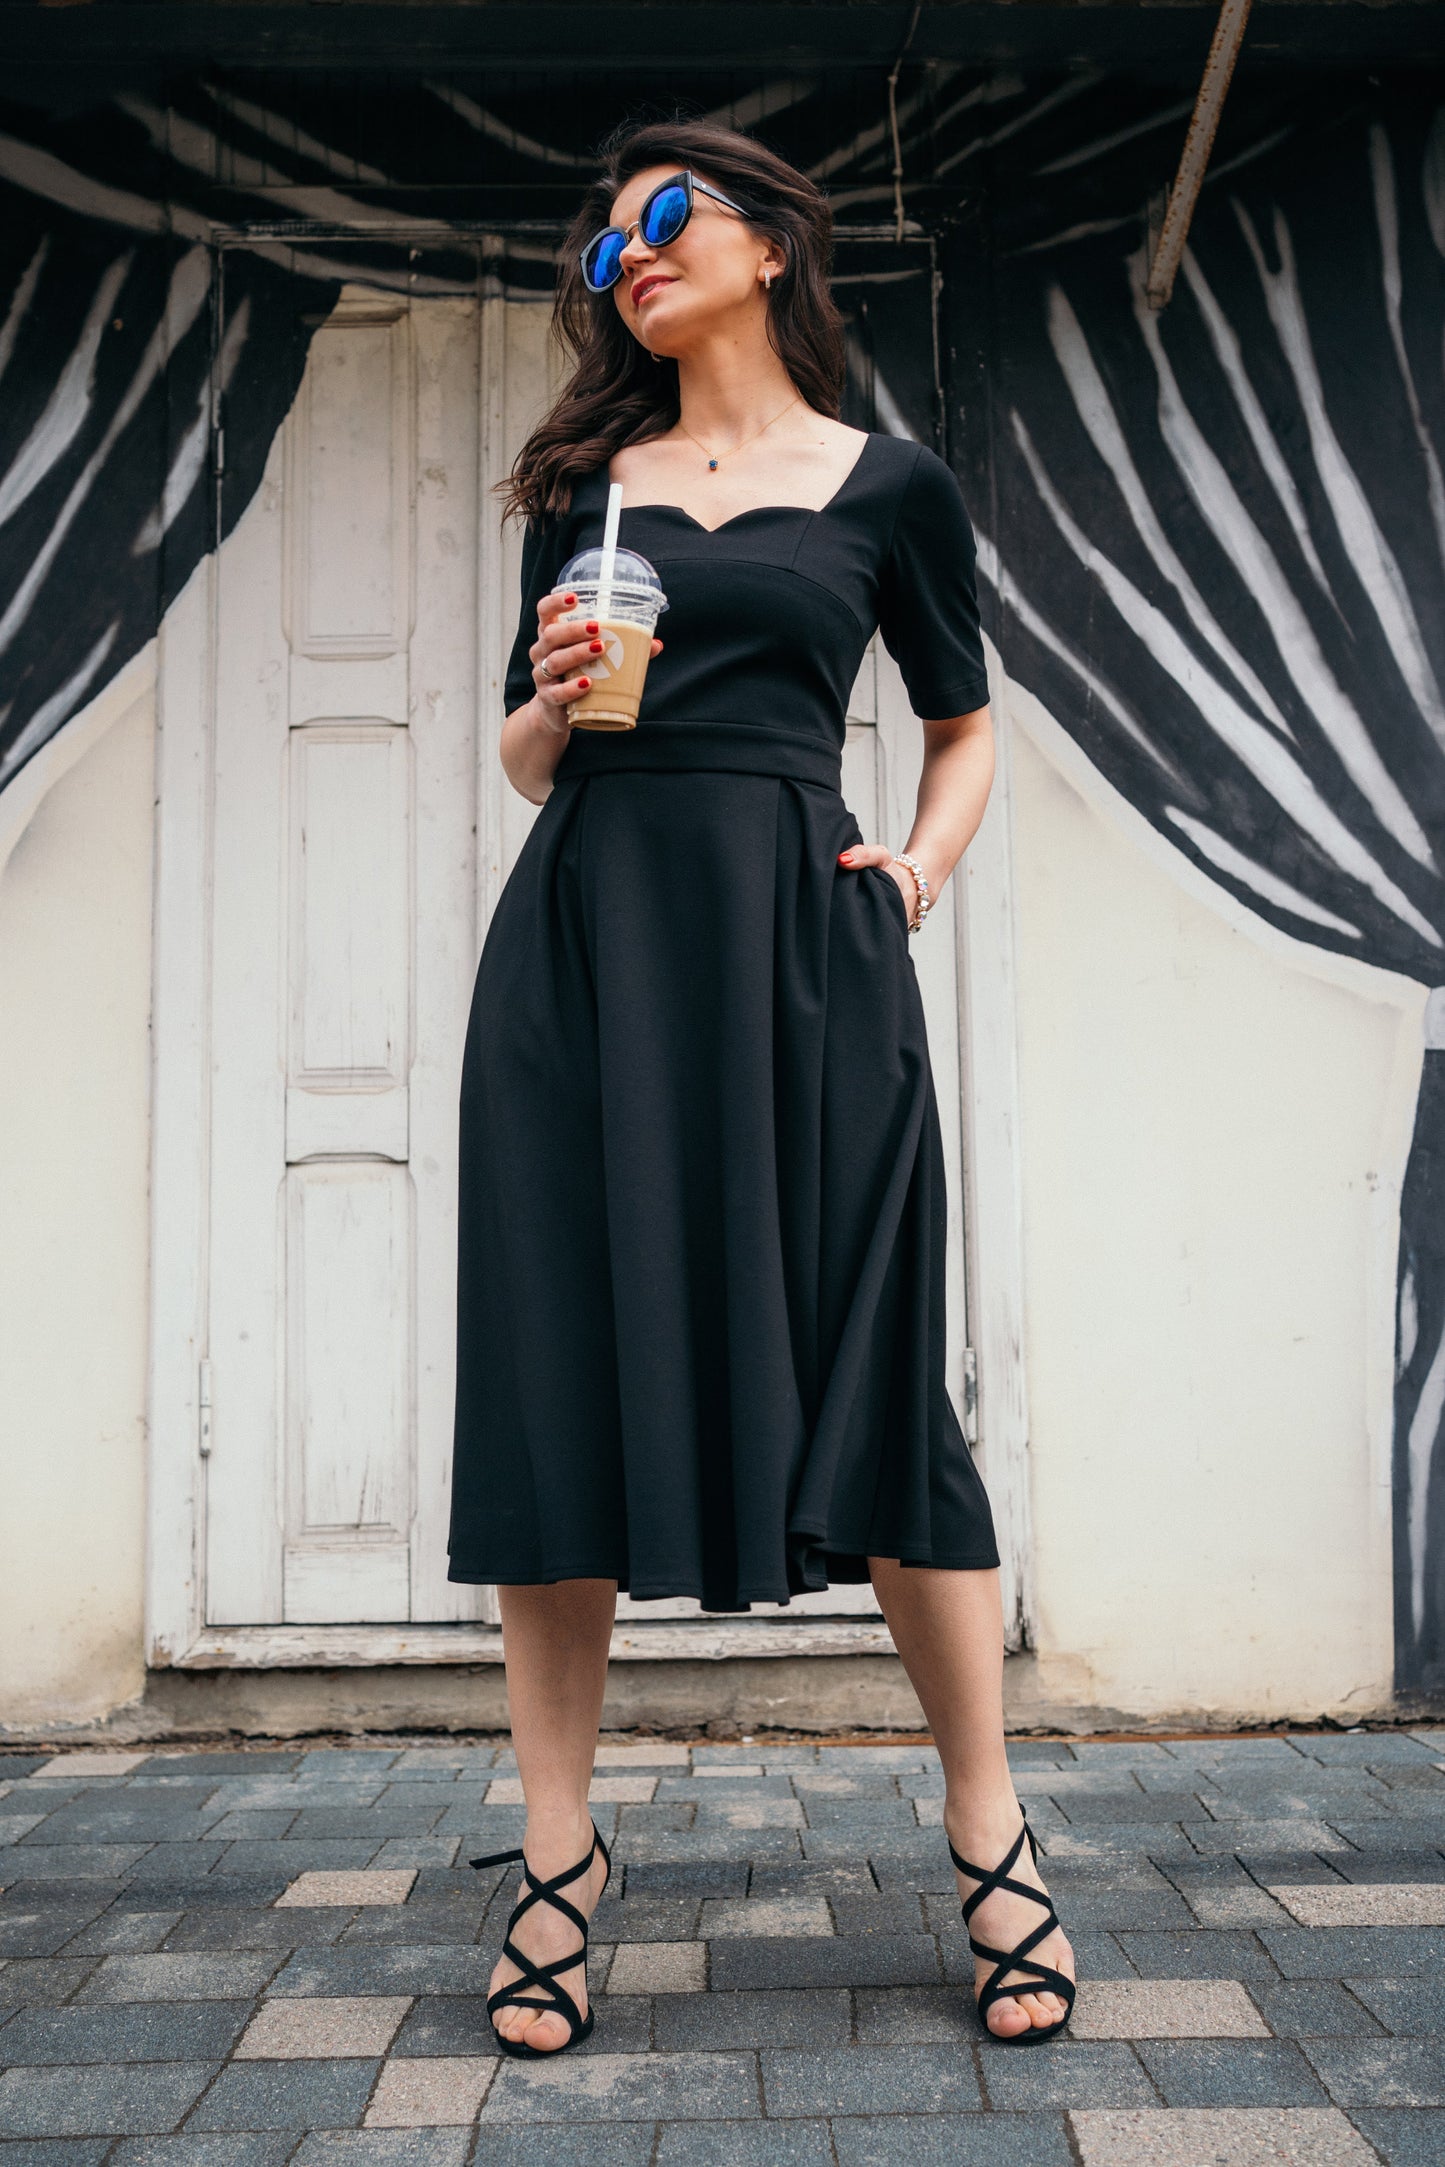 Pearl black below-the-knee A-lined skirt with pockets